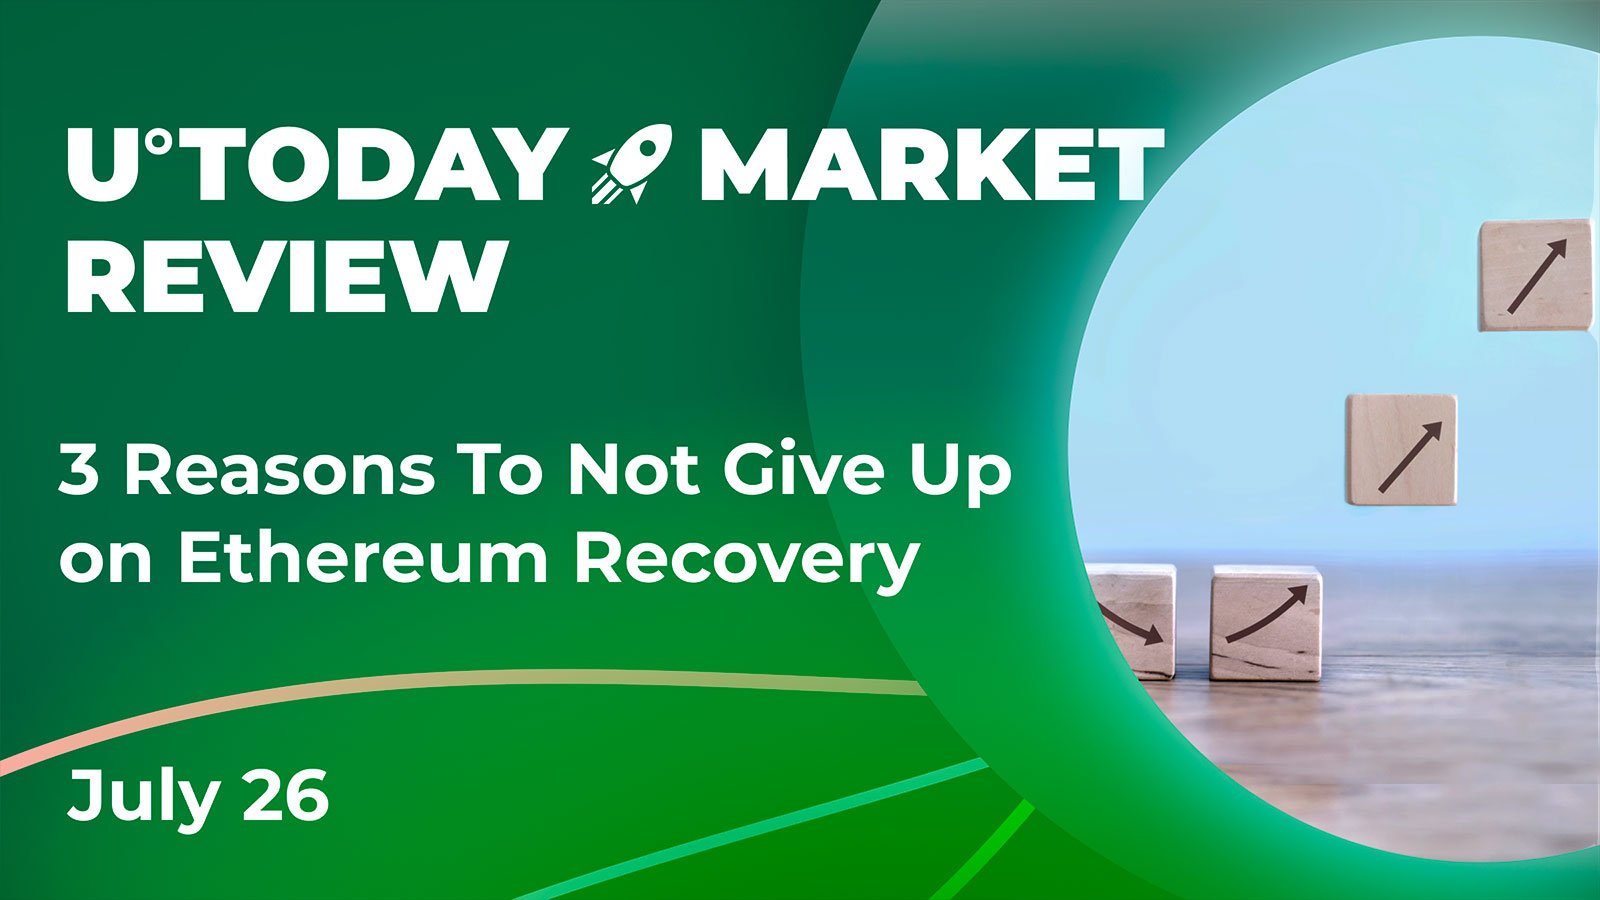 3 Reasons To Not Give Up on Ethereum Recovery Despite Plunge Below $1,500: Crypto Market Review, July 26